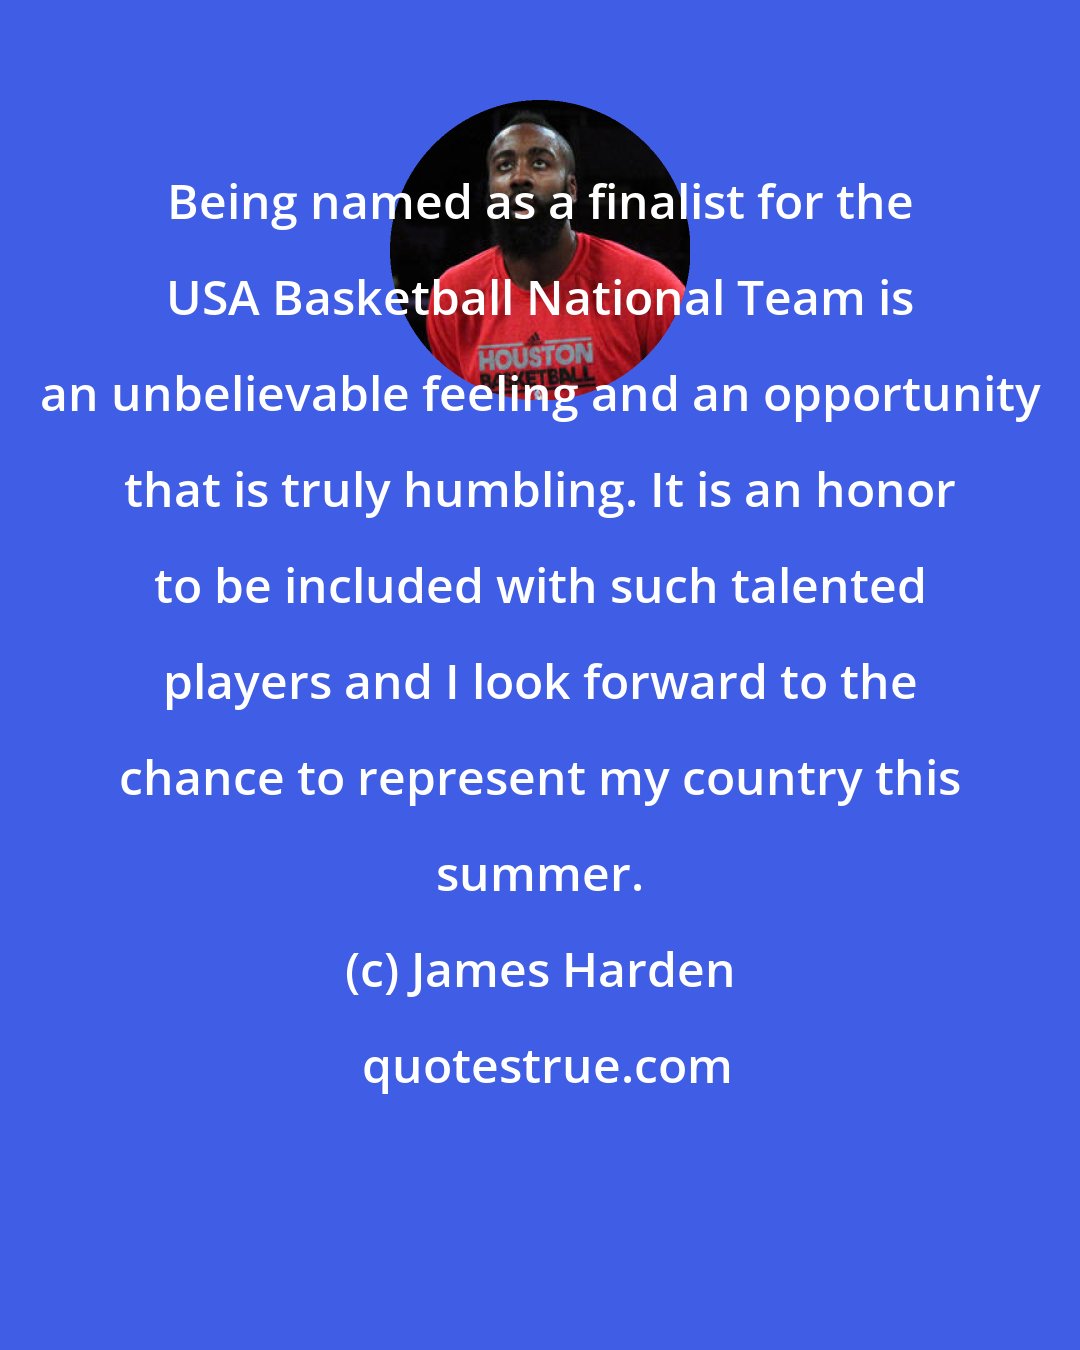 James Harden: Being named as a finalist for the USA Basketball National Team is an unbelievable feeling and an opportunity that is truly humbling. It is an honor to be included with such talented players and I look forward to the chance to represent my country this summer.